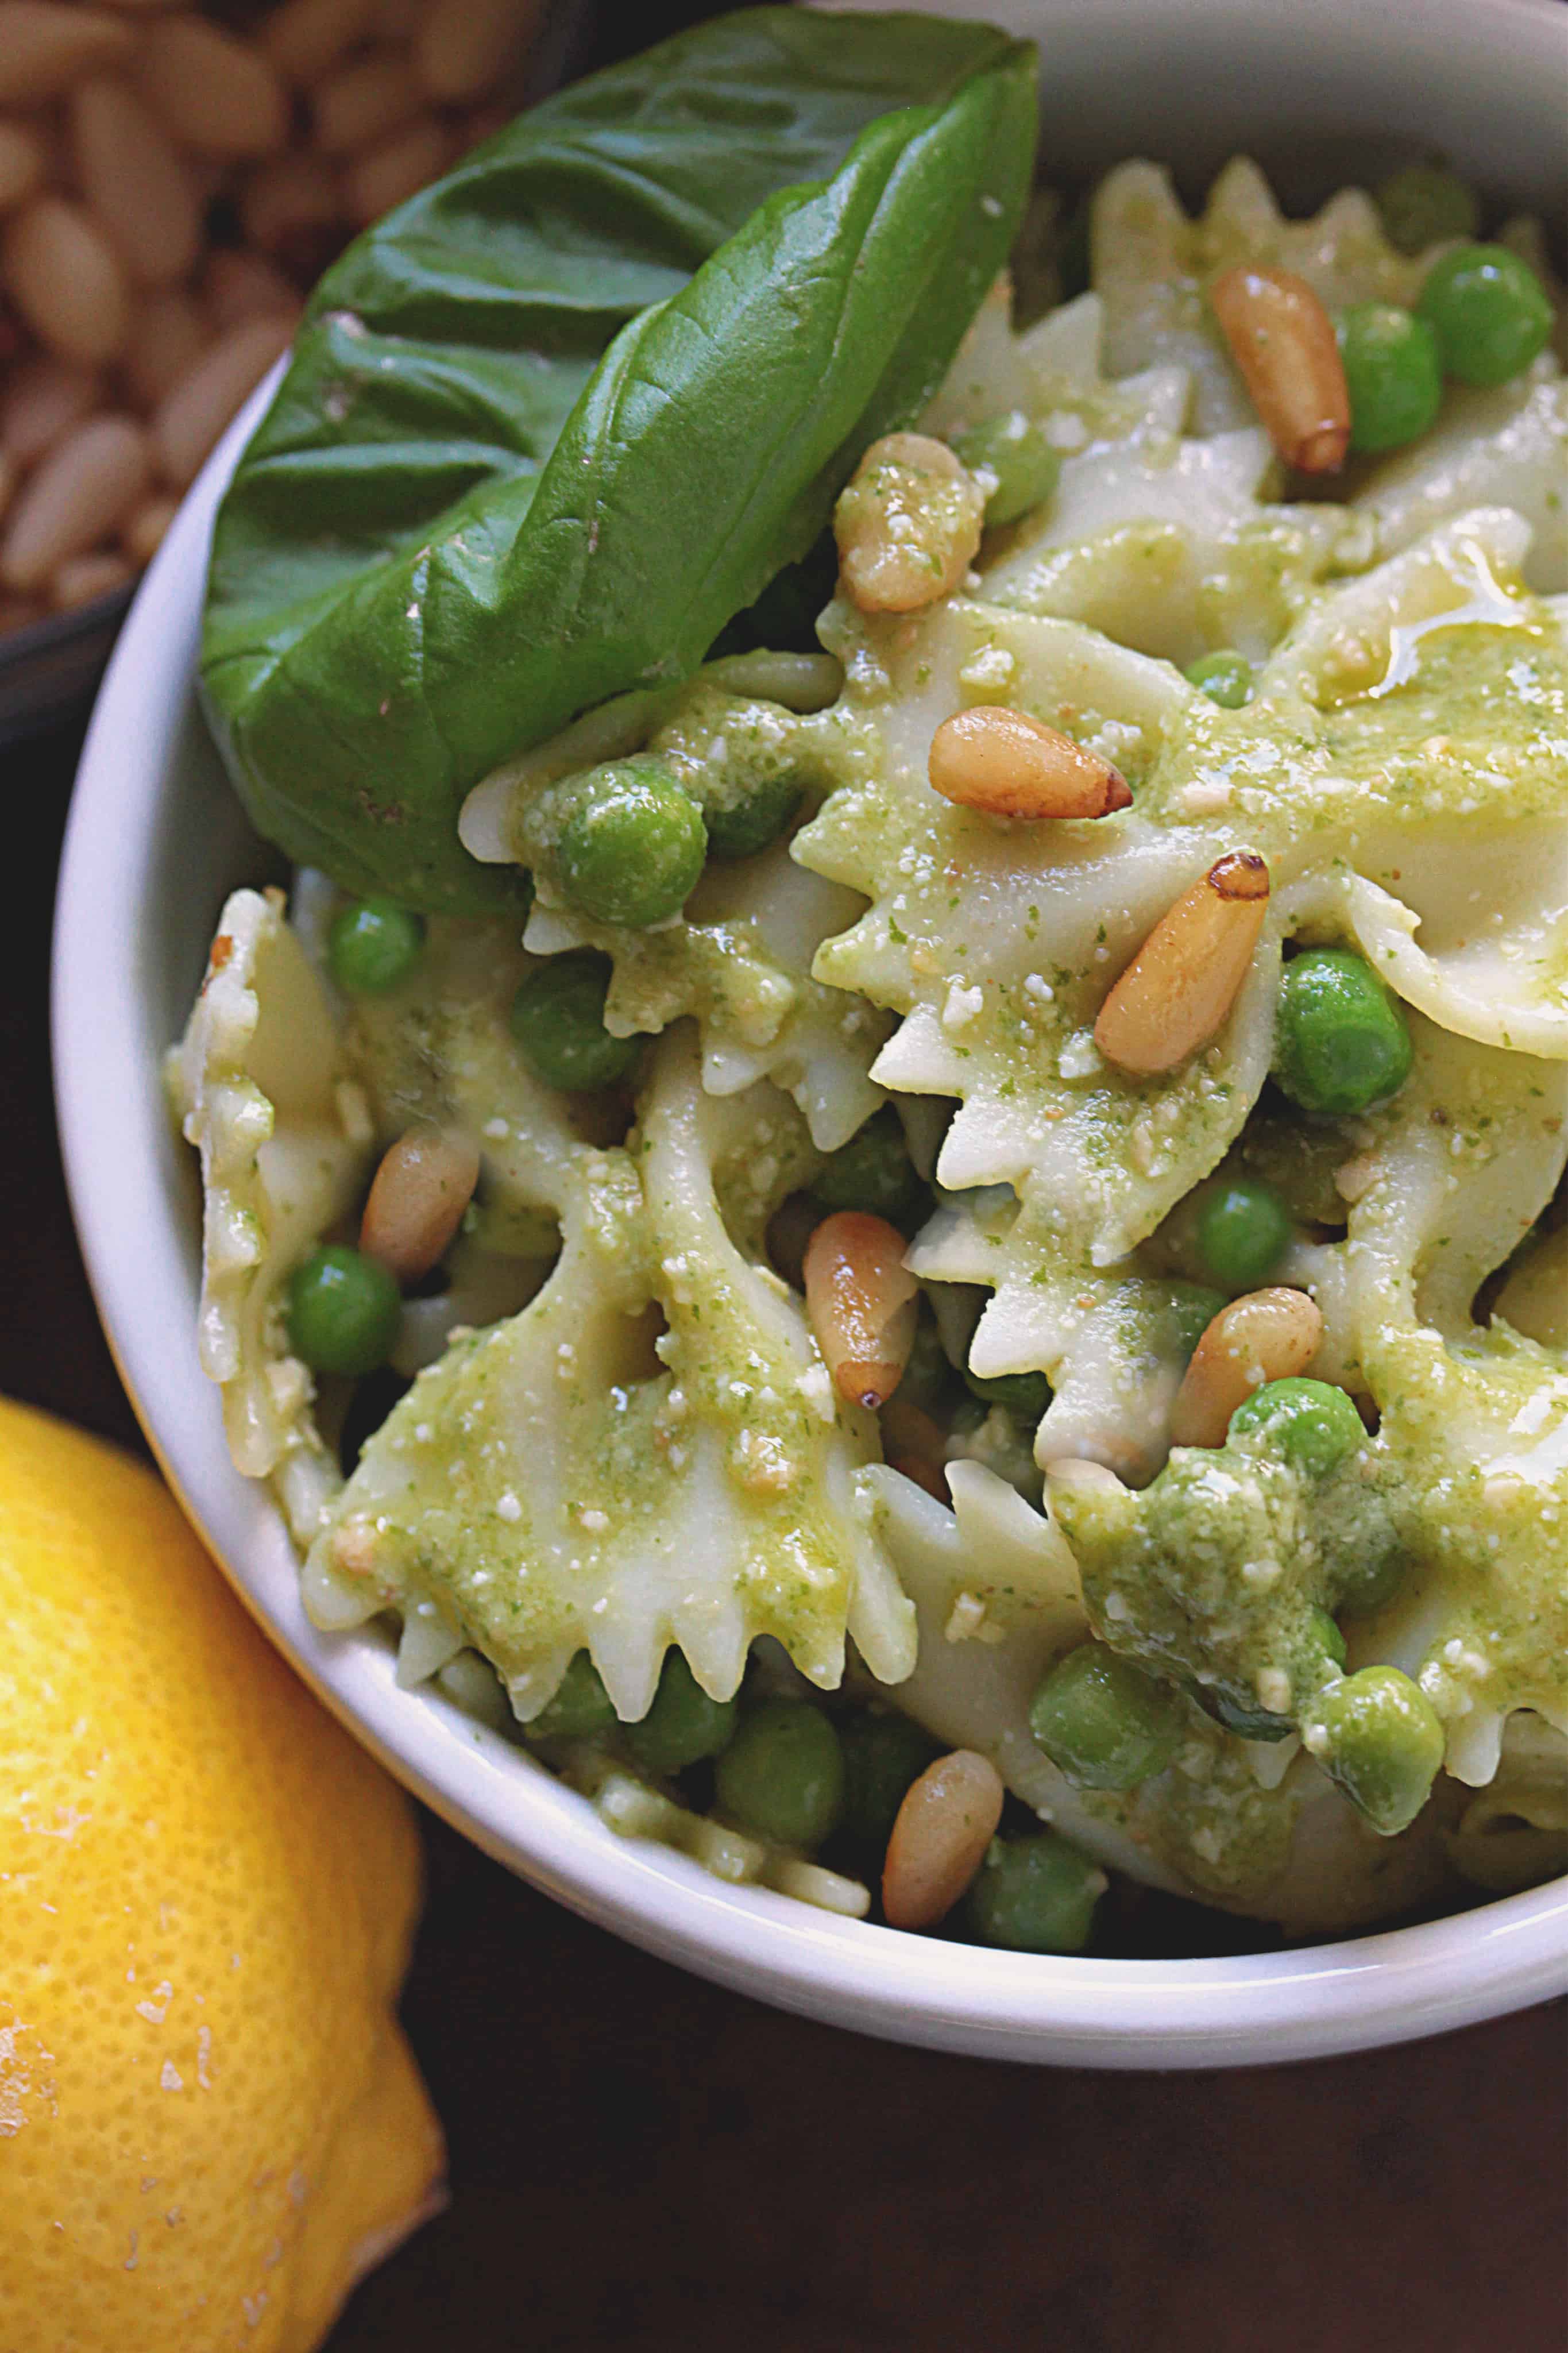 Bow Tie Pesto Pasta Salad with Peas in a white bowl garnished with peas, basil and pine nuts, with a lemon in the background